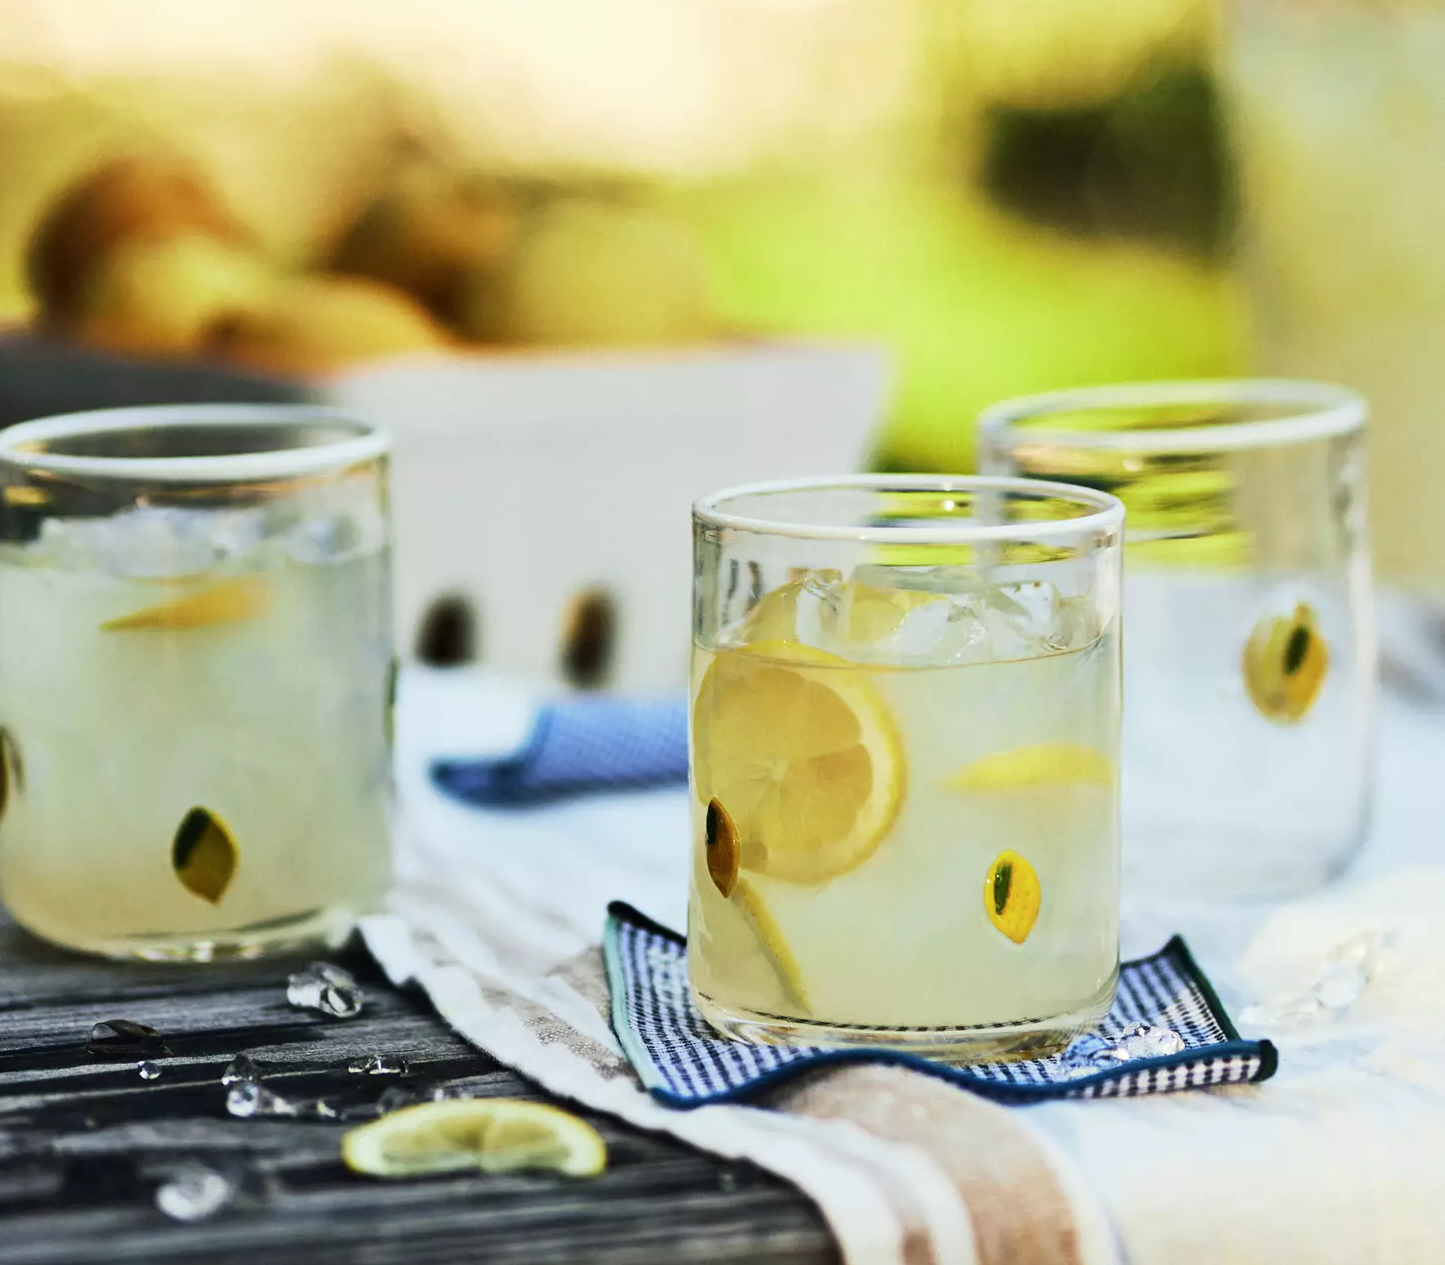 glasses with lemon designs on outdoor table 